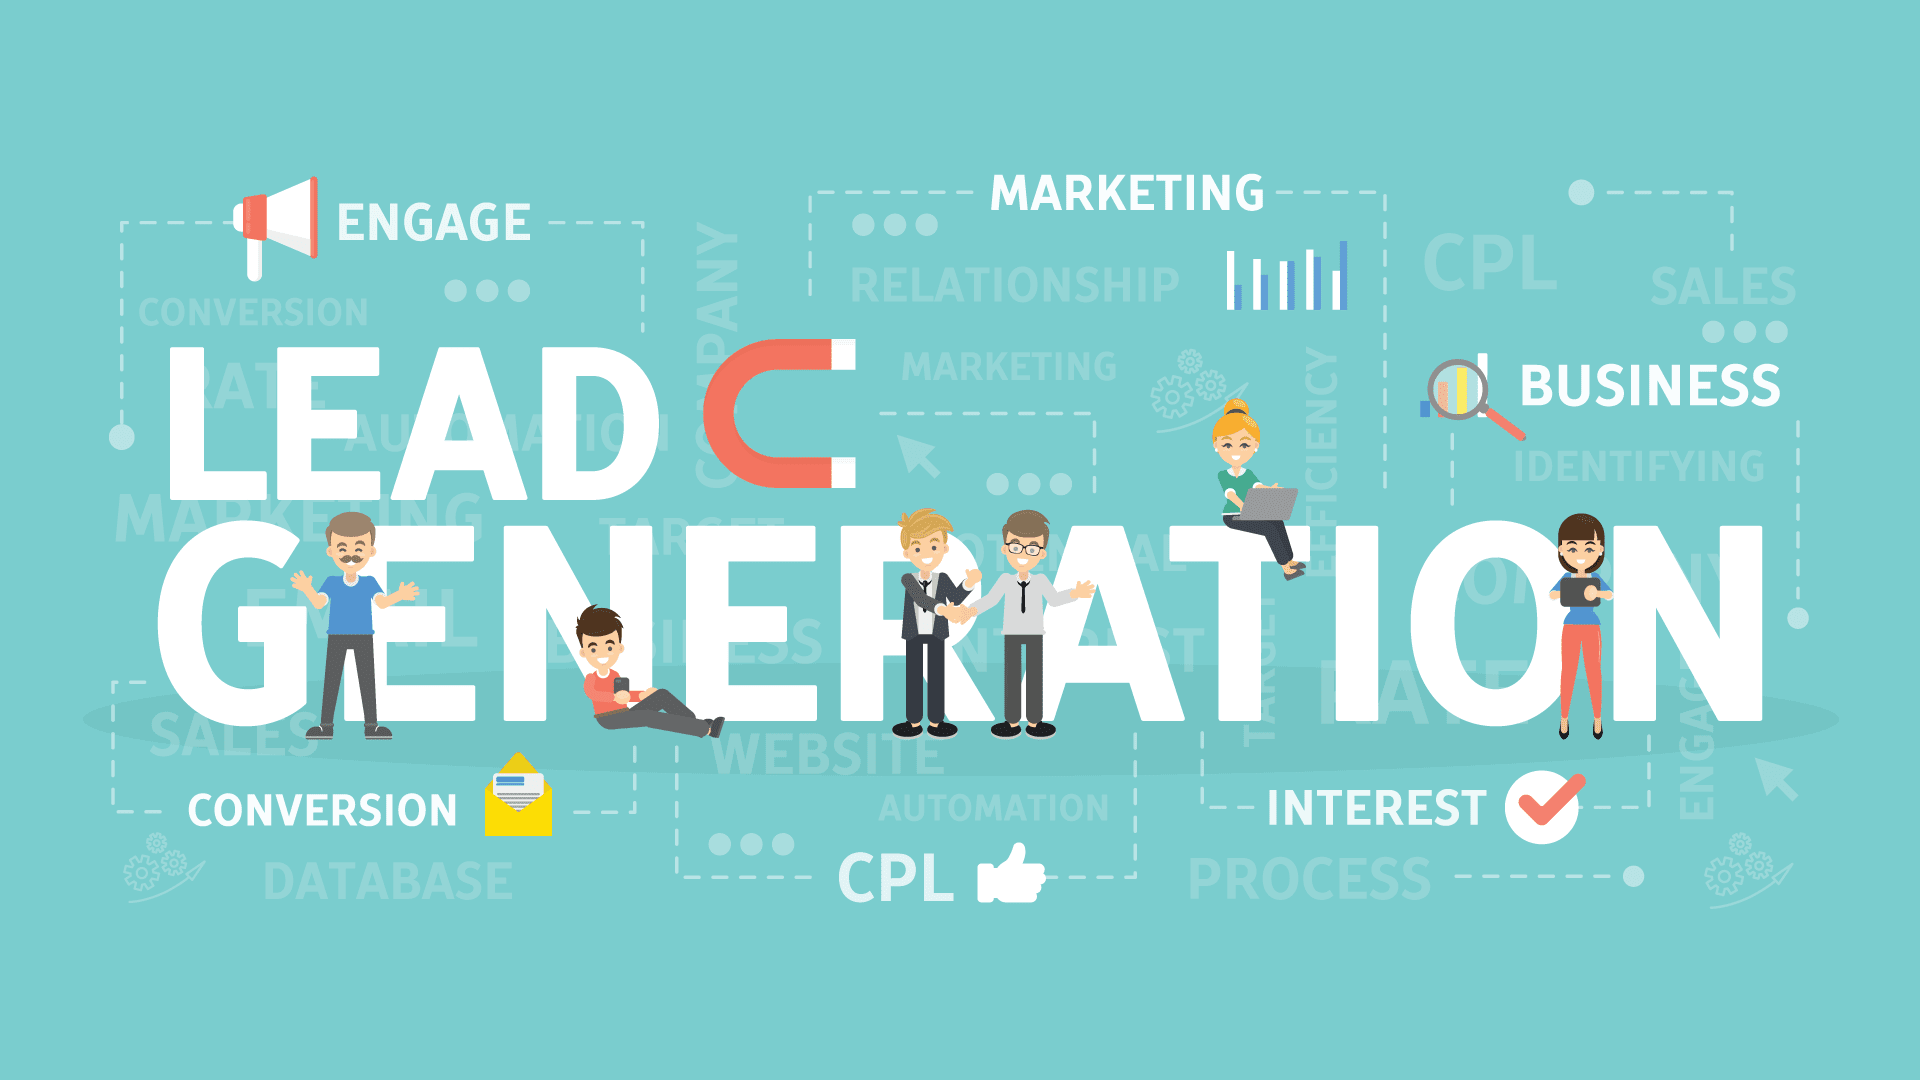 How to Optimize Your WordPress Site for Lead Generation